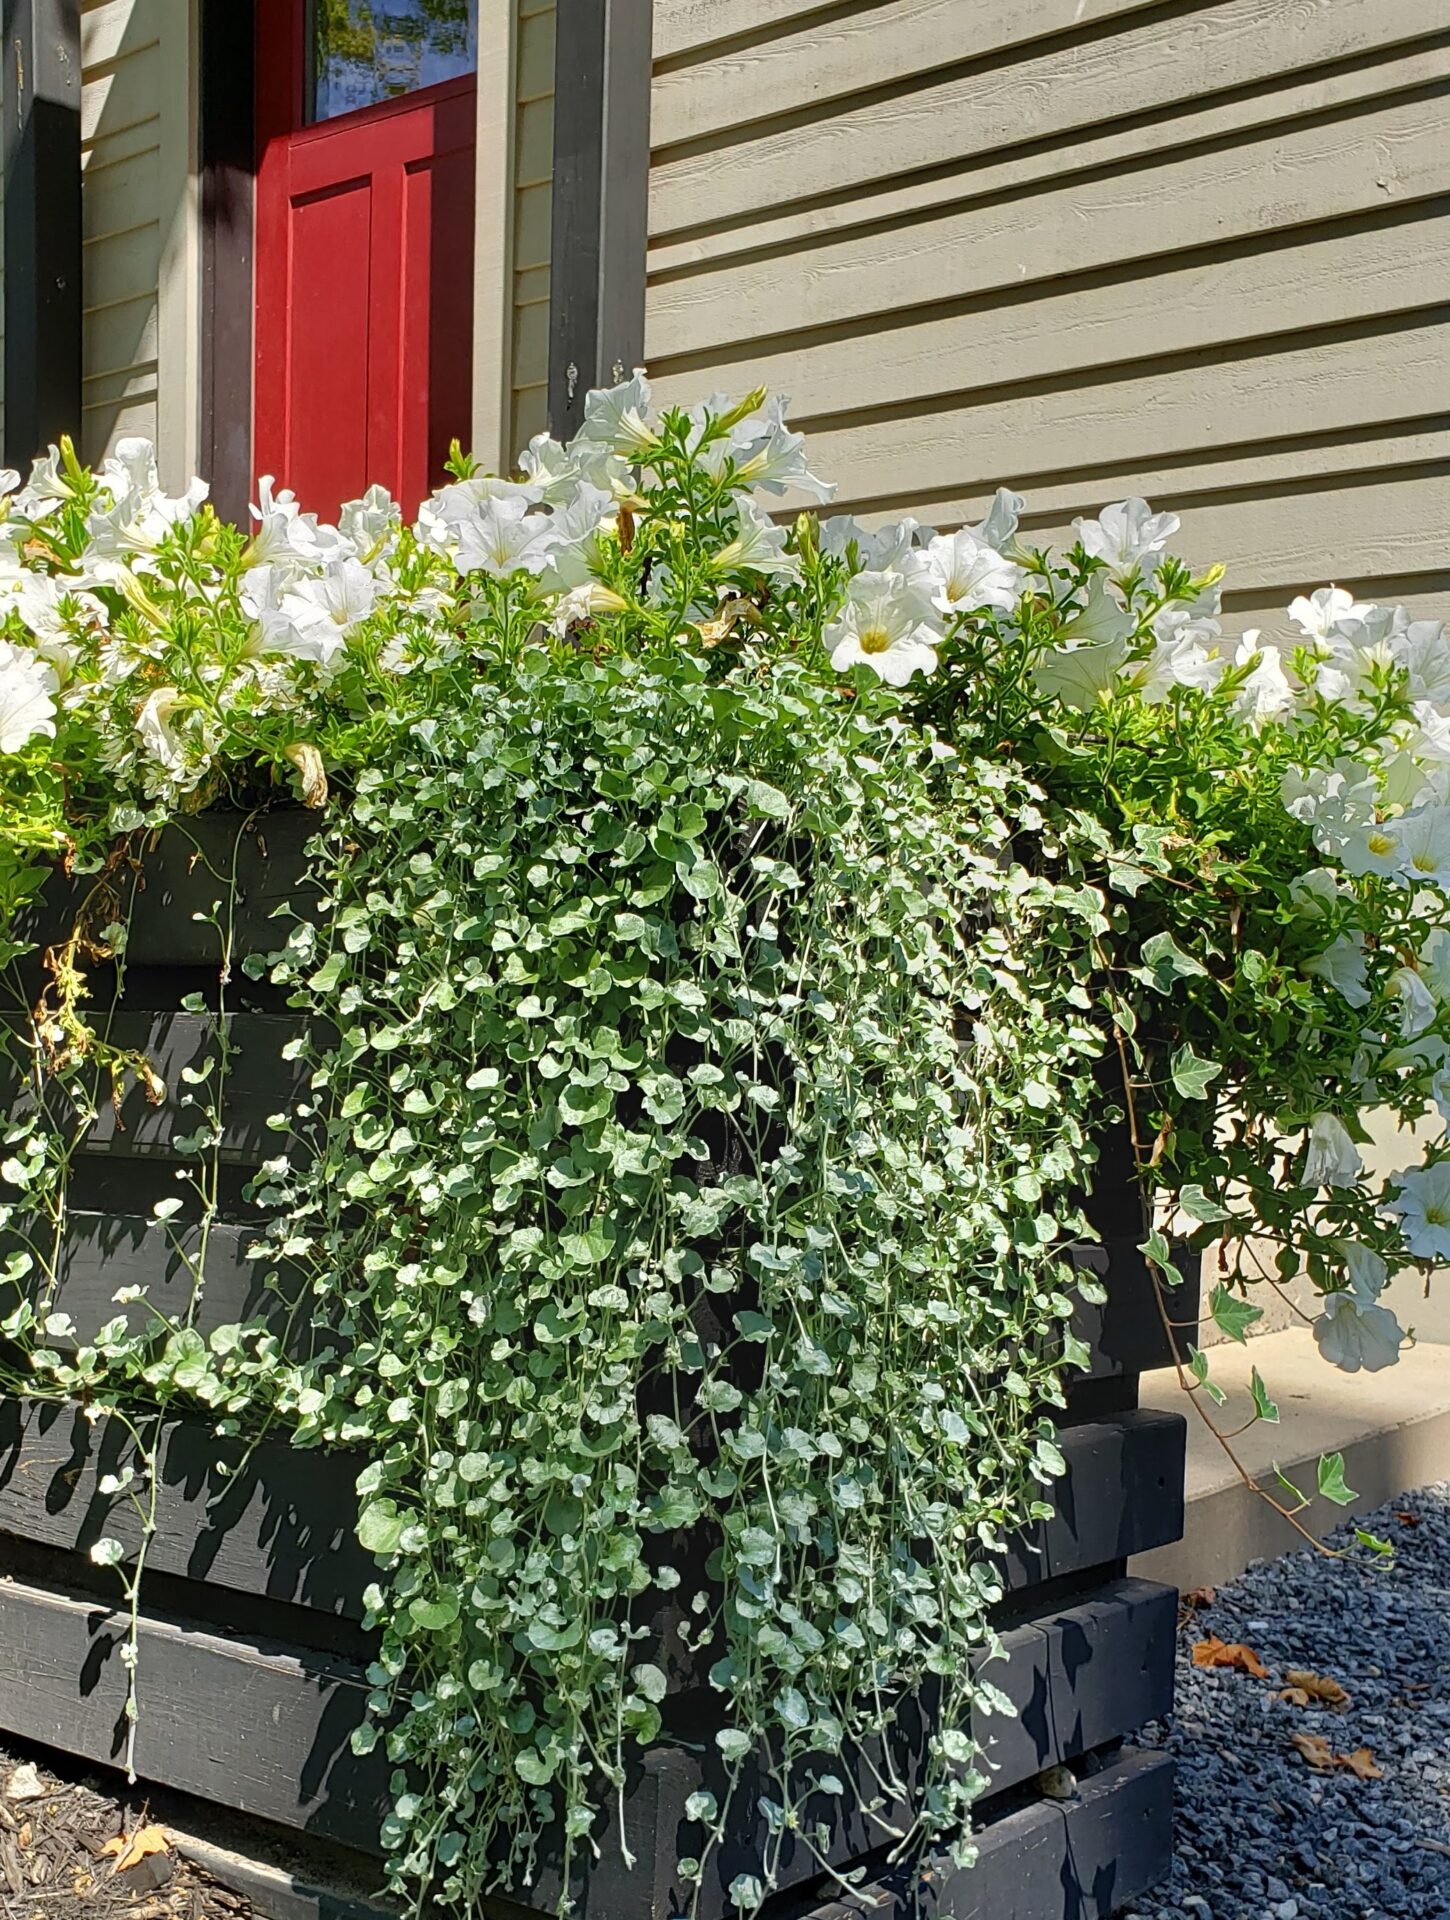 The image shows a lush planter with cascading greenery and vibrant white flowers, set against a house with a red door and beige siding.